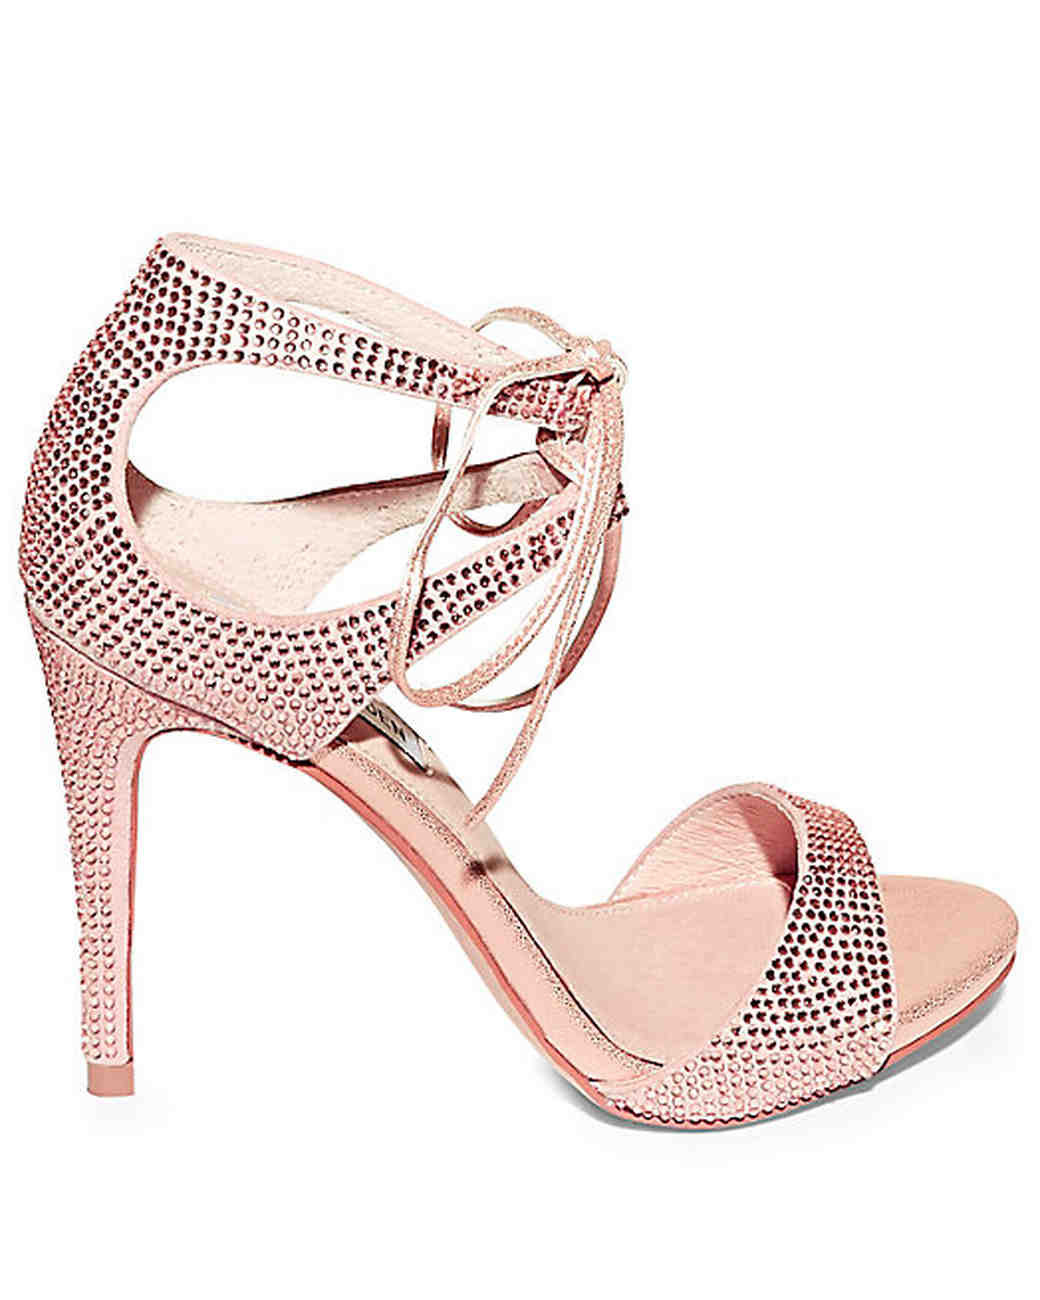 Summer Wedding Shoes
 50 Best Shoes for a Bride to Wear to a Summer Wedding